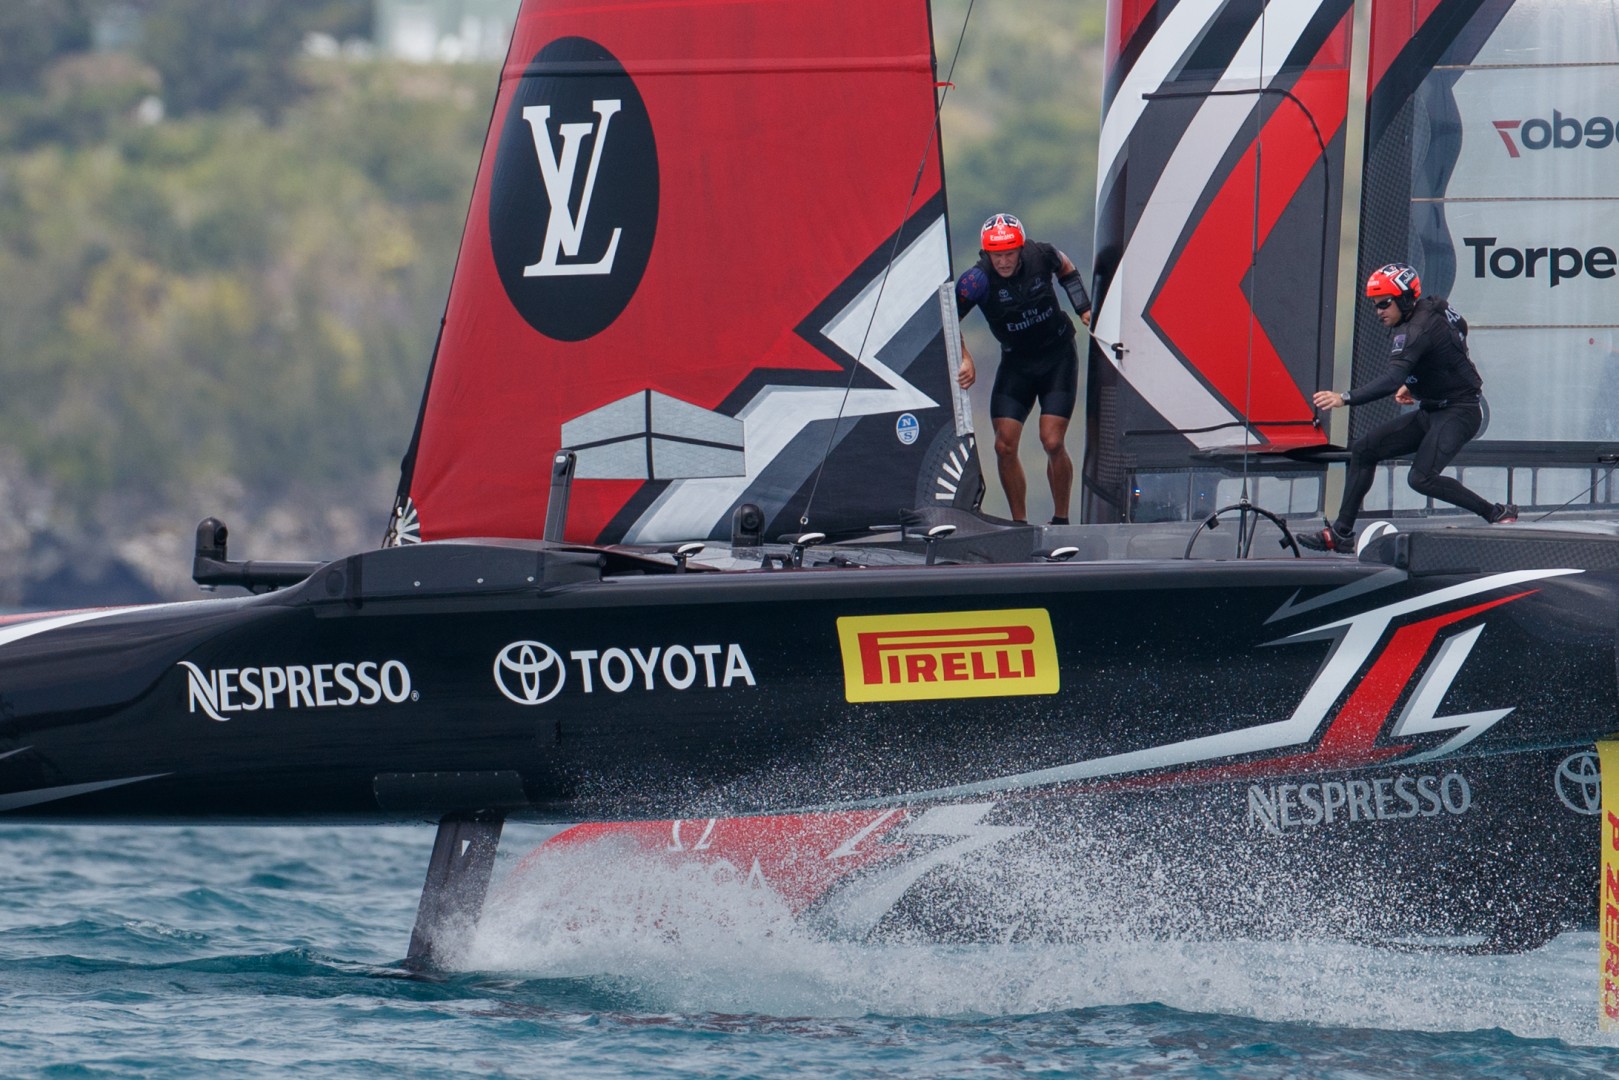 Louis Vuitton and the 37th America’s Cup